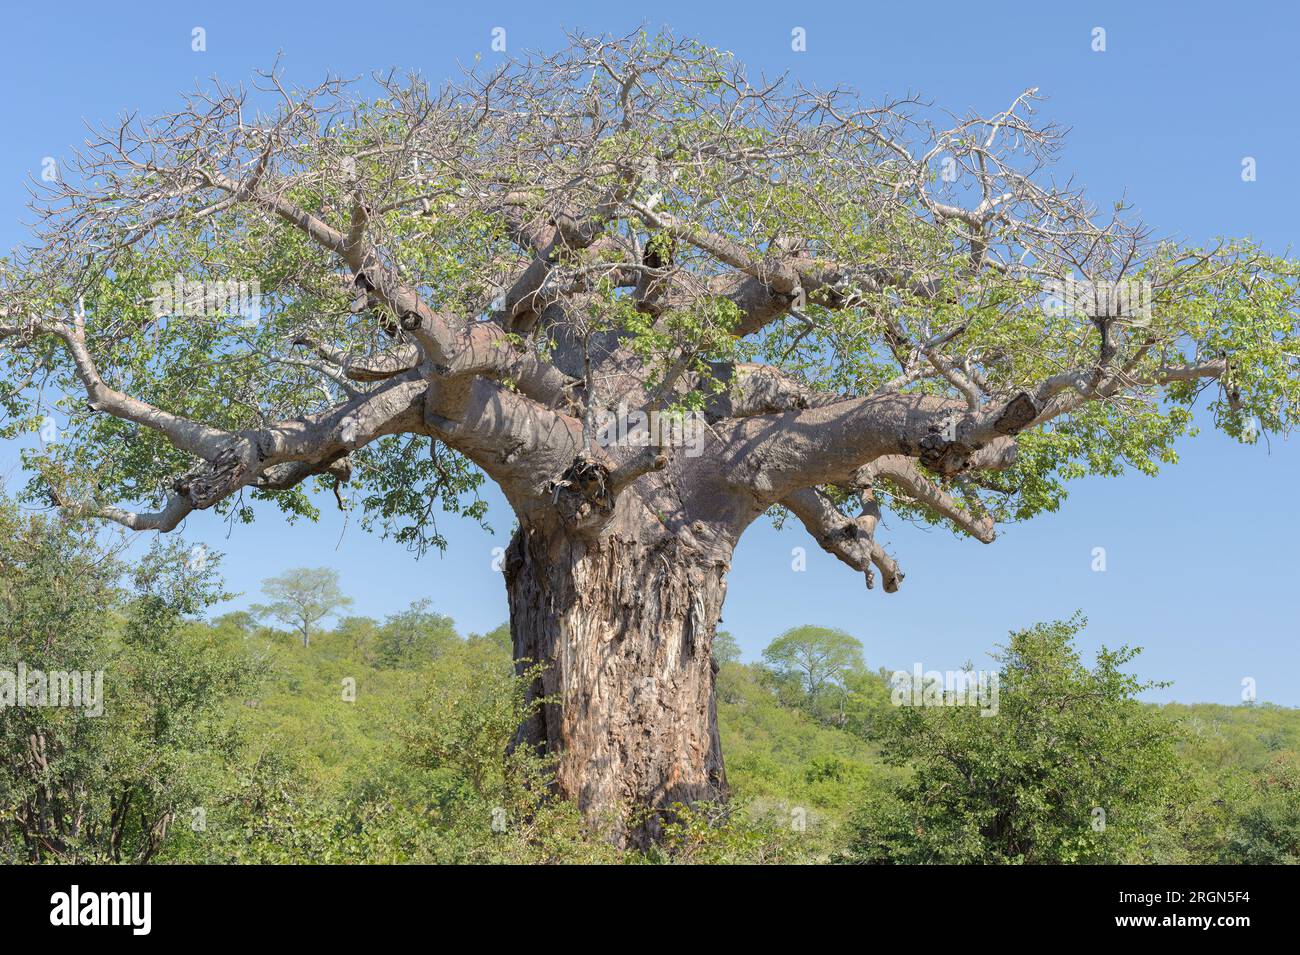 Baobab tree in Kruger National Park, South Africa Stock Photo